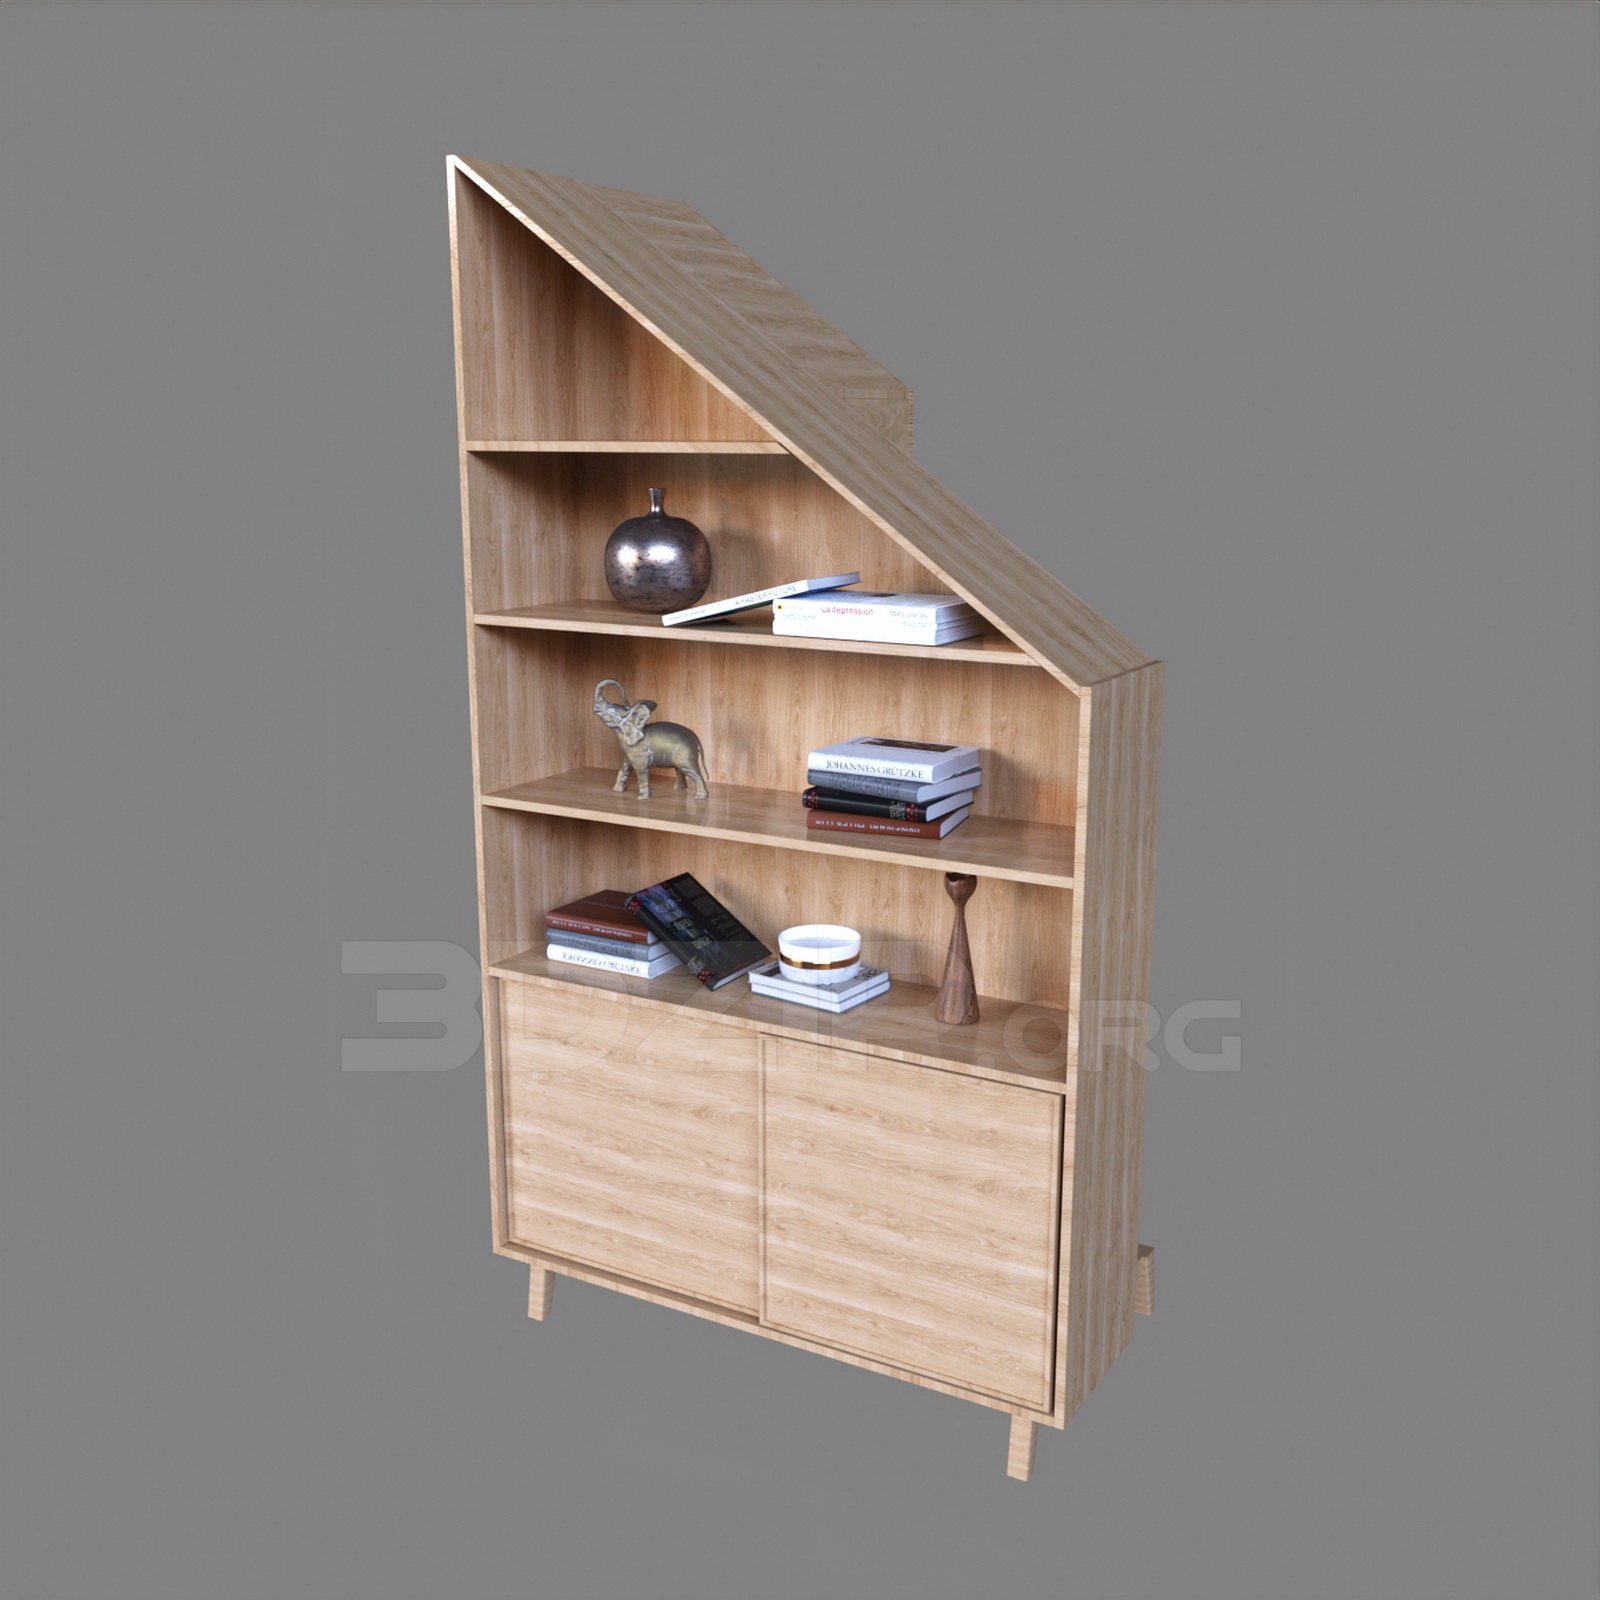 12204. Download Free Display Cabinets Model By Phuong Tran